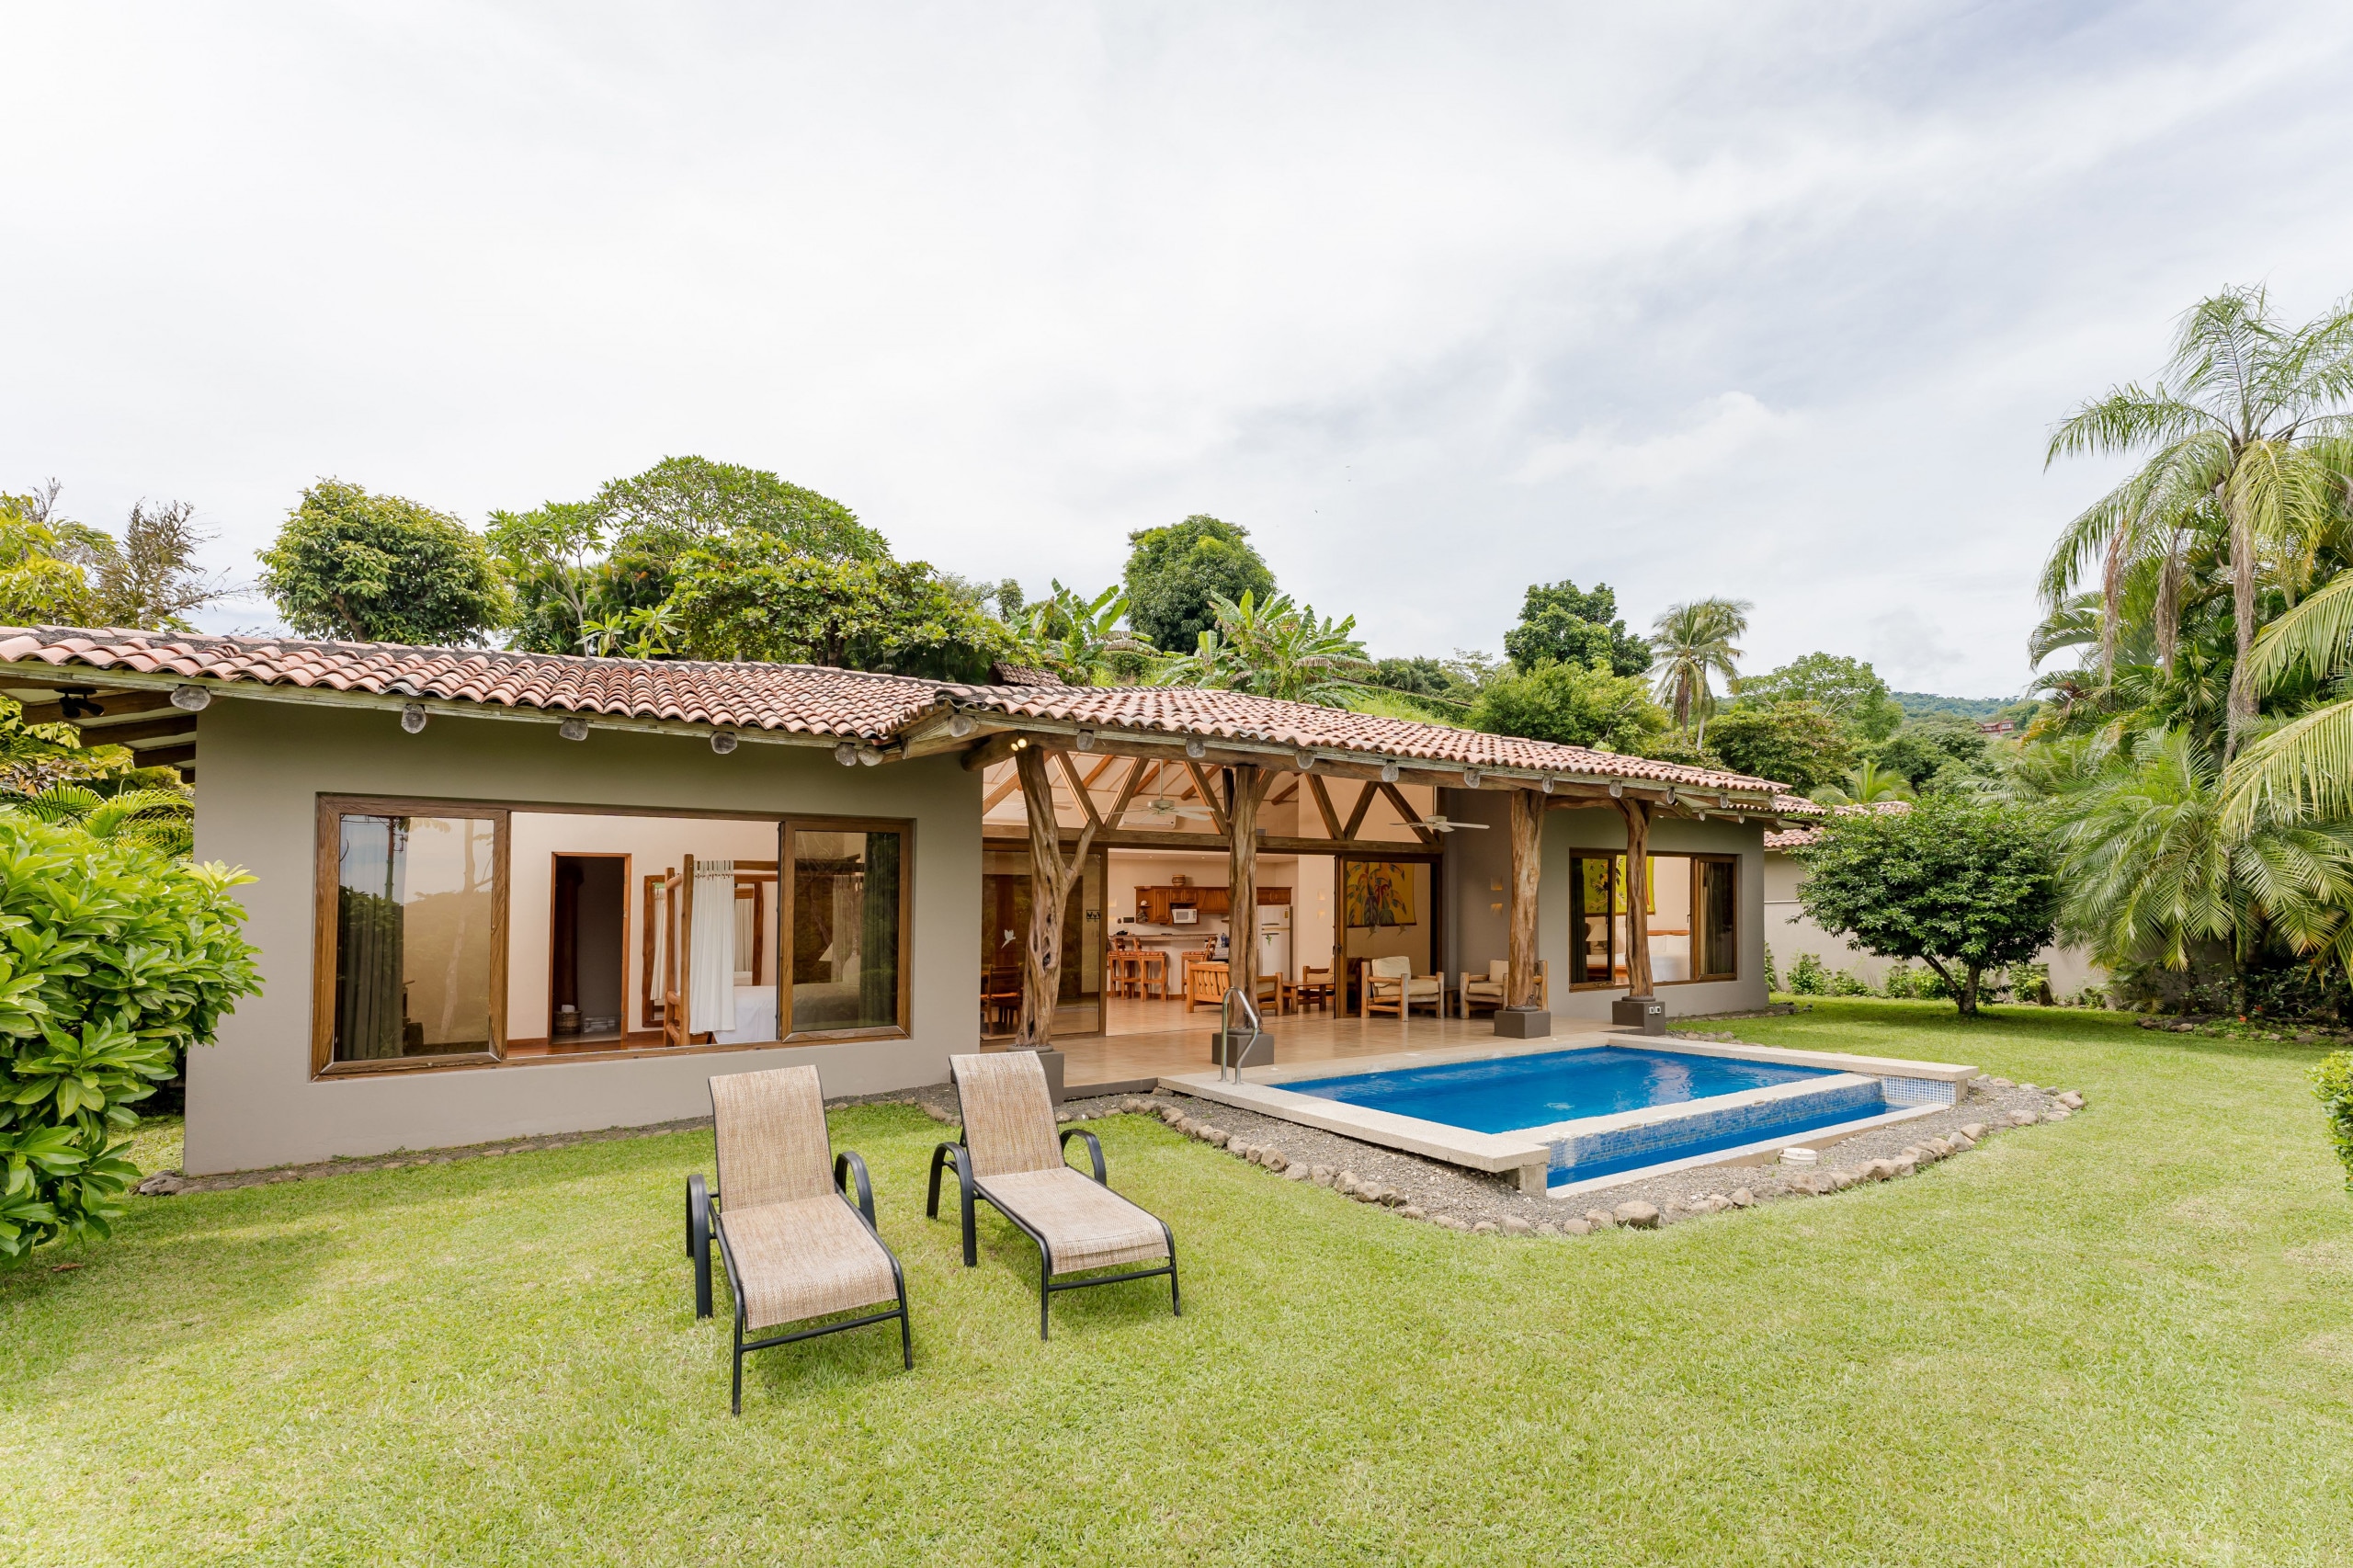 Property Image 1 - Tamarindo, charming, private, and rustic-style 3 bedroom villa